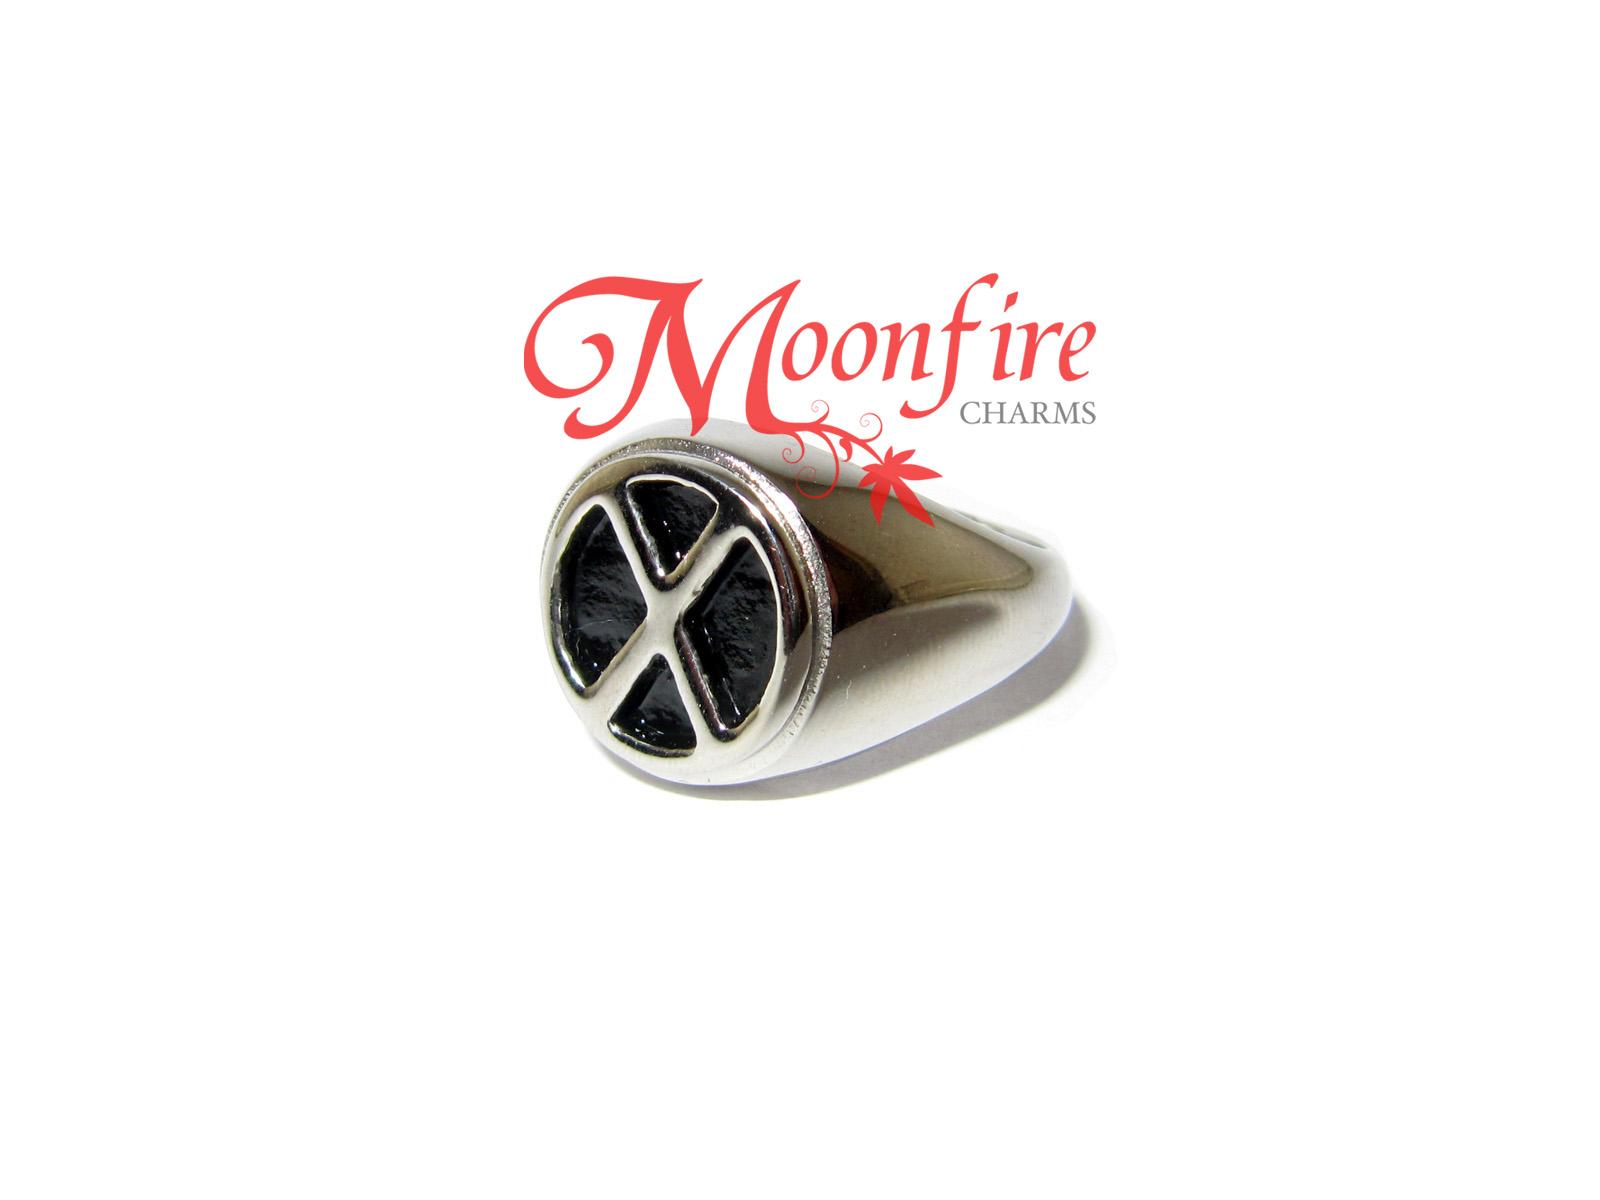 All the X-Men Superhero Logo - X-Men: Charles Xavier School For Gifted Youngsters X Logo Ring ...